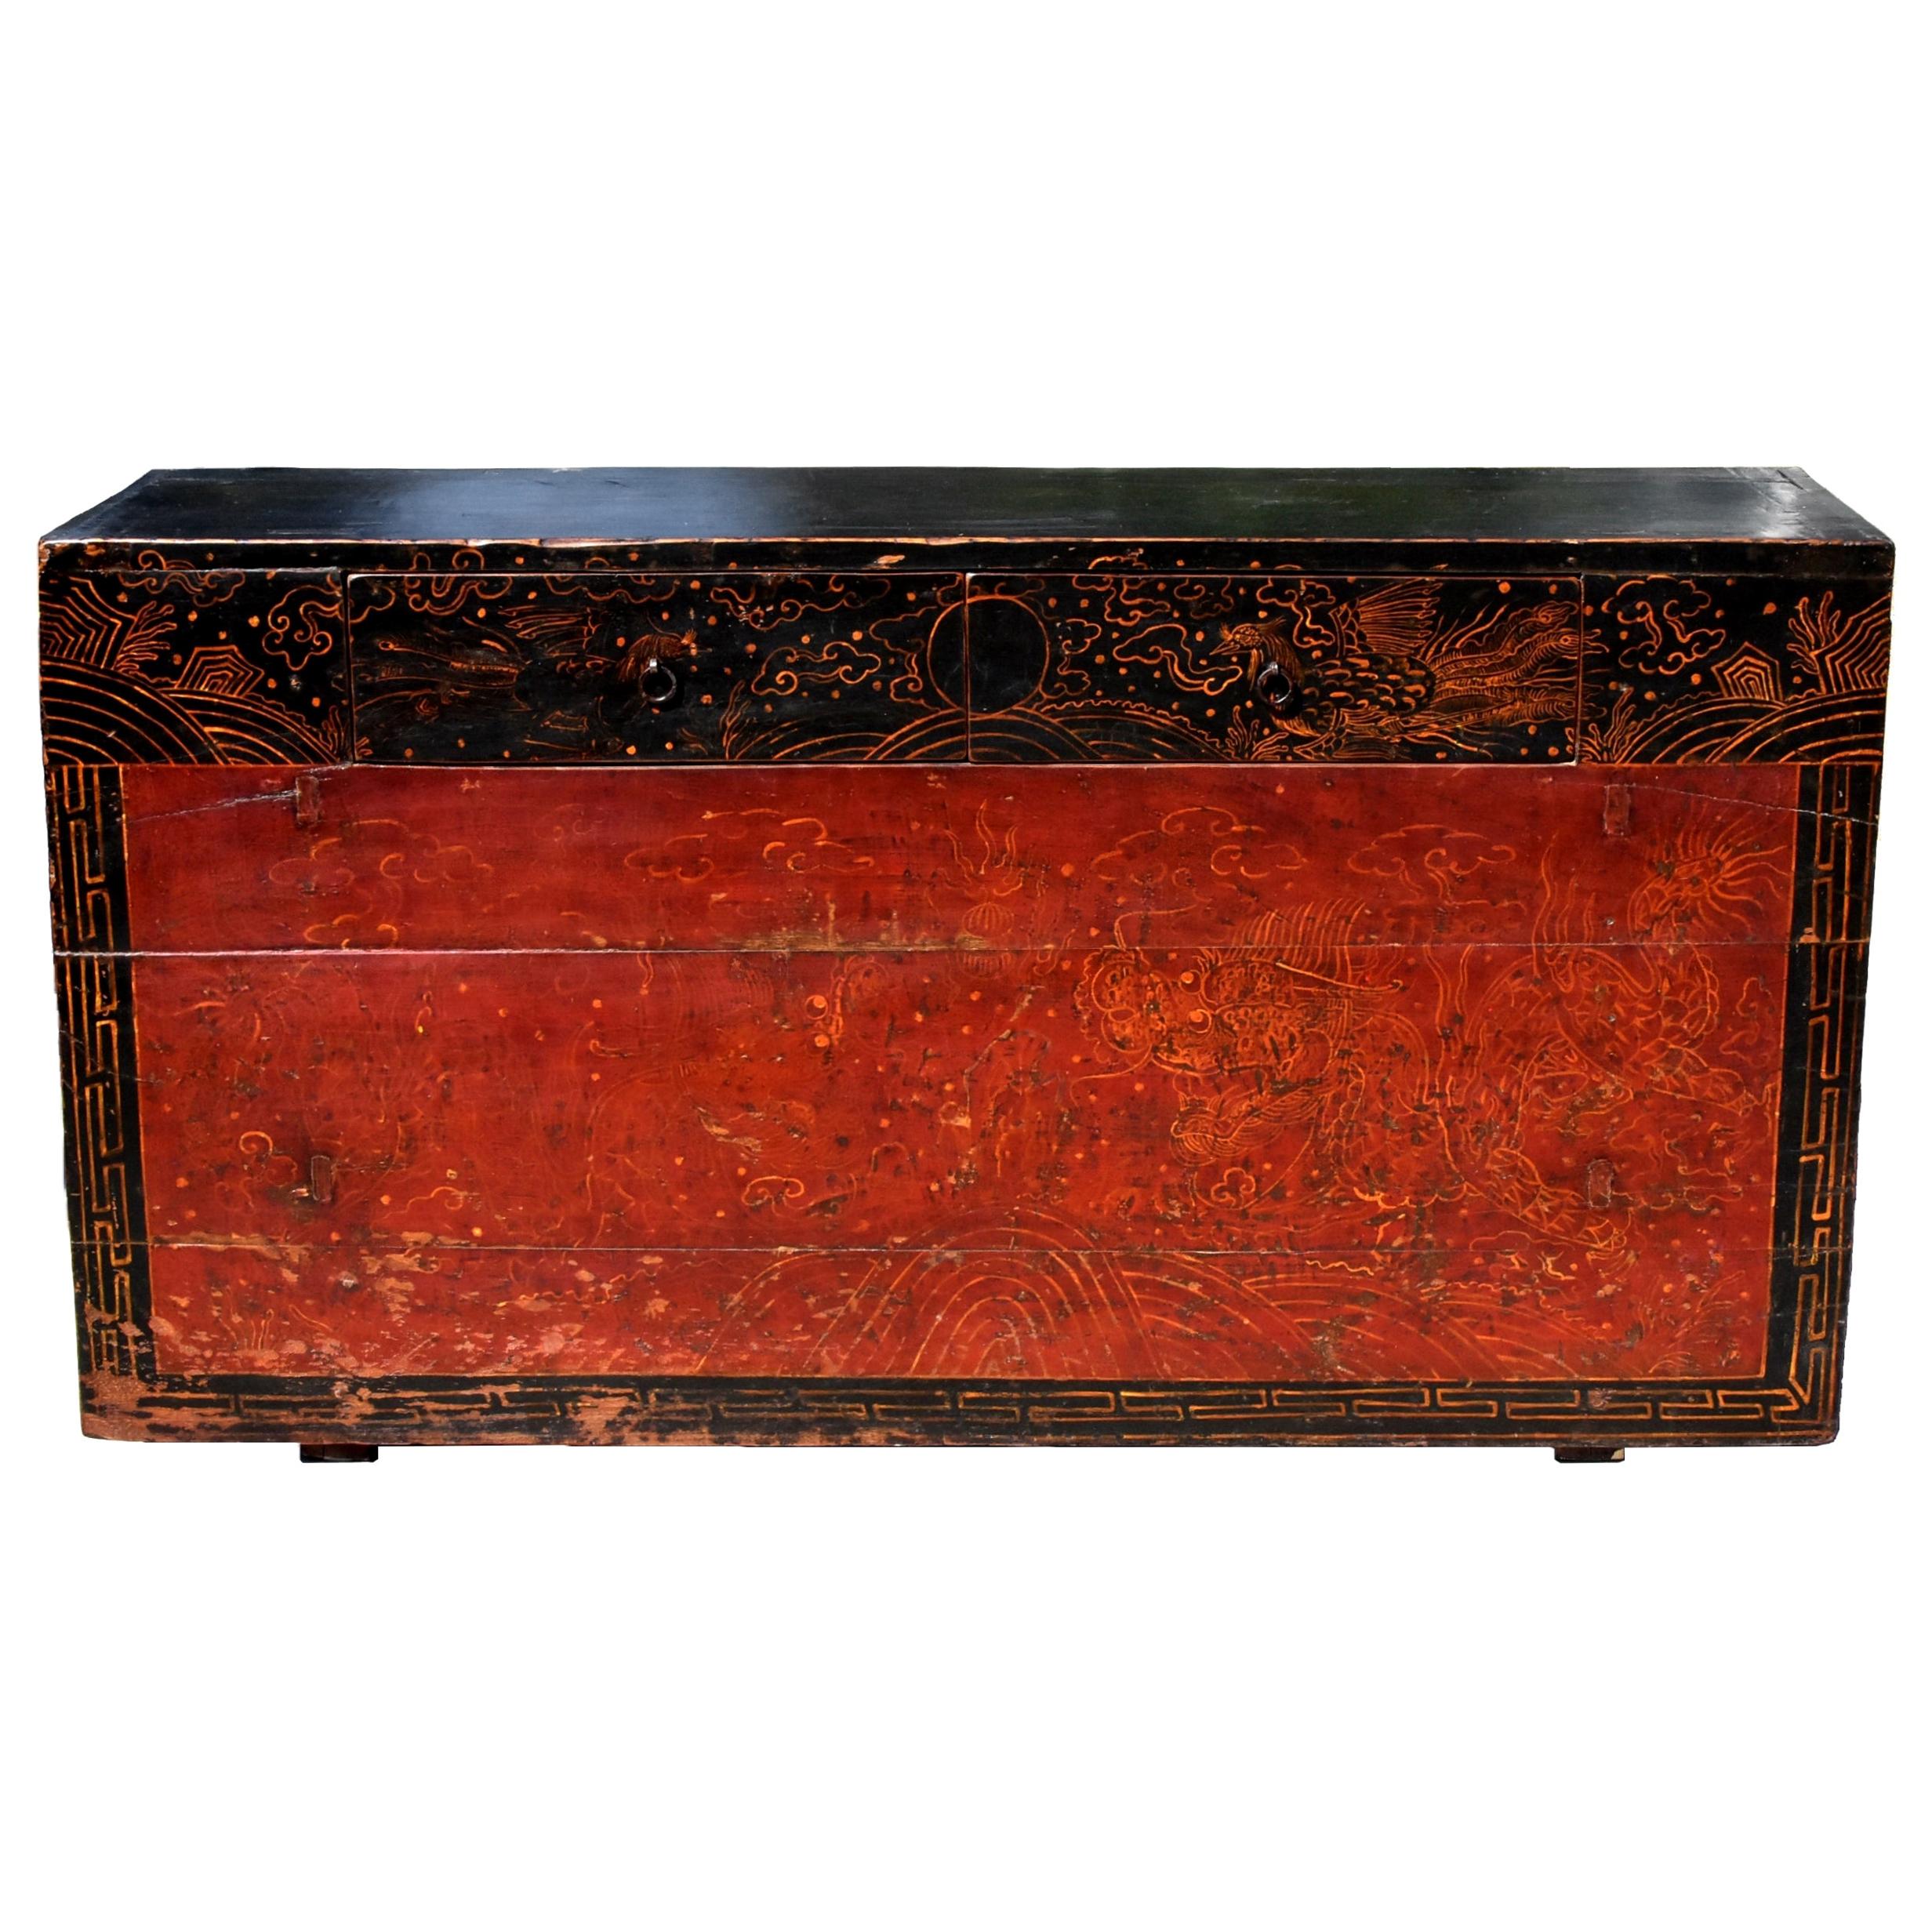 Antique Mongolian Table Chest with 2 Drawers, Hand Painted Dragons and Phoenixes